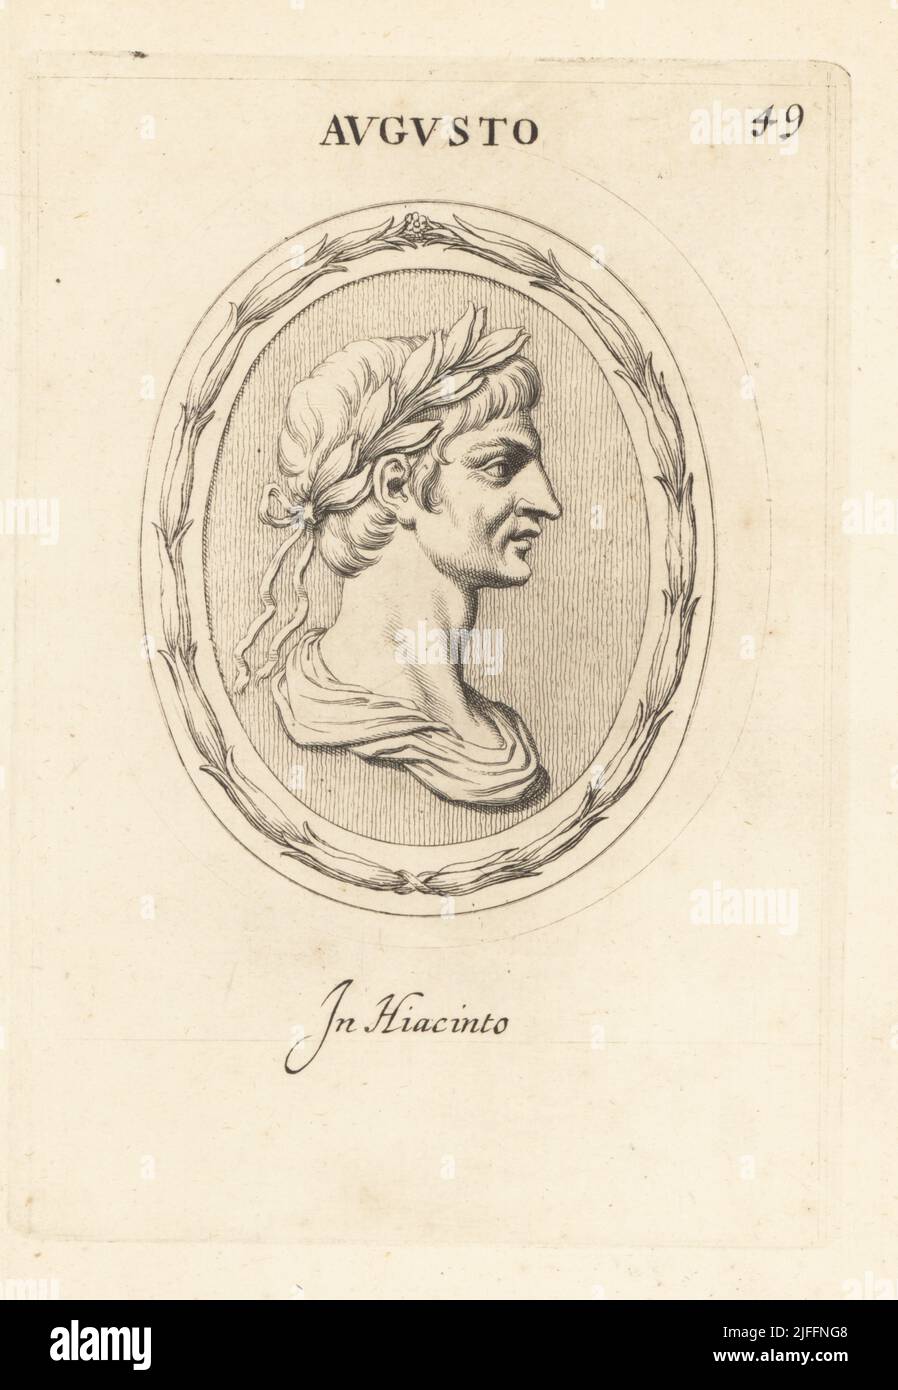 Bust of Caesar Augustus or Octavian, first Roman Emperor, 63 BC - 14 AD. Wearing a laurel wreath. Gem in hyacinth topaz found in the ruins of Catania in Sicily. Augusto. In hiacinto. Copperplate engraving by Giovanni Battista Galestruzzi after Leonardo Agostini from Gemmae et Sculpturae Antiquae Depicti ab Leonardo Augustino Senesi, Abraham Blooteling, Amsterdam, 1685. Stock Photo